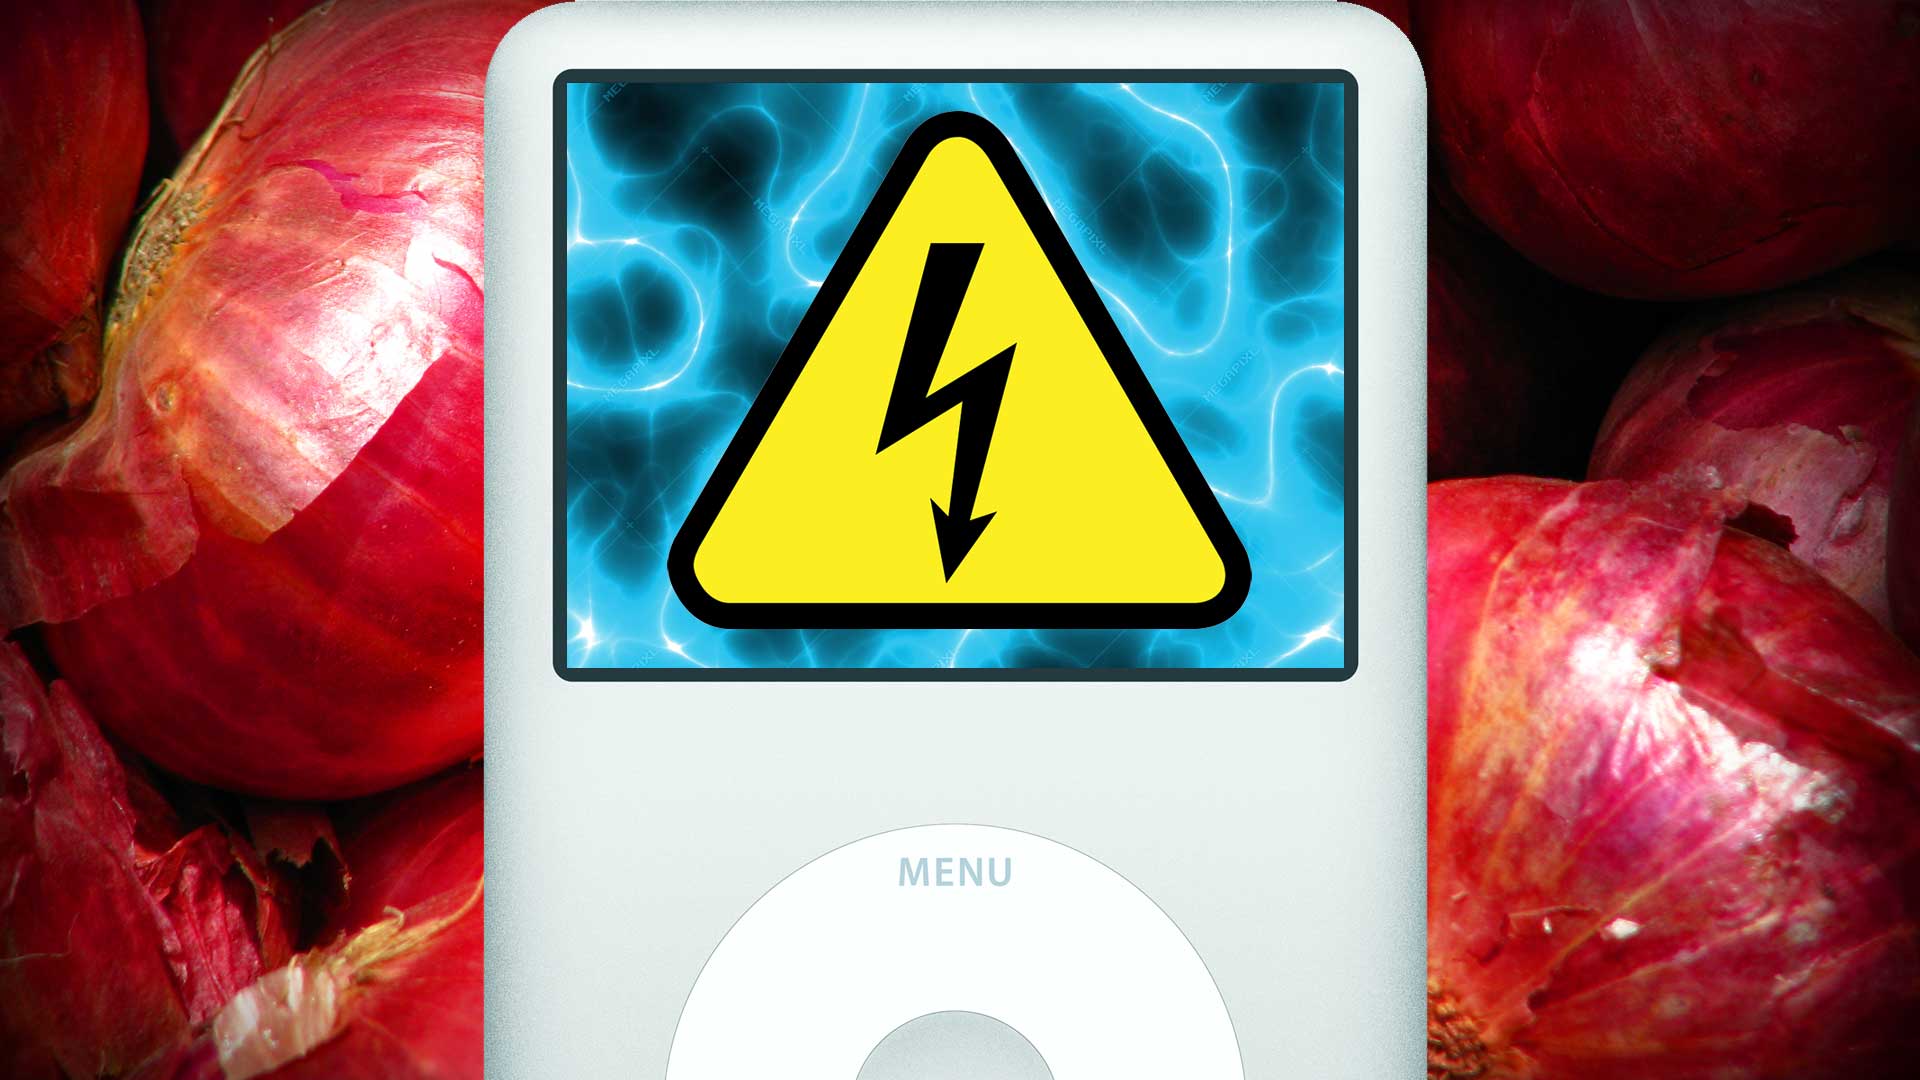 Can You Really Charge Your iPod with a Gatorade Soaked Onion?